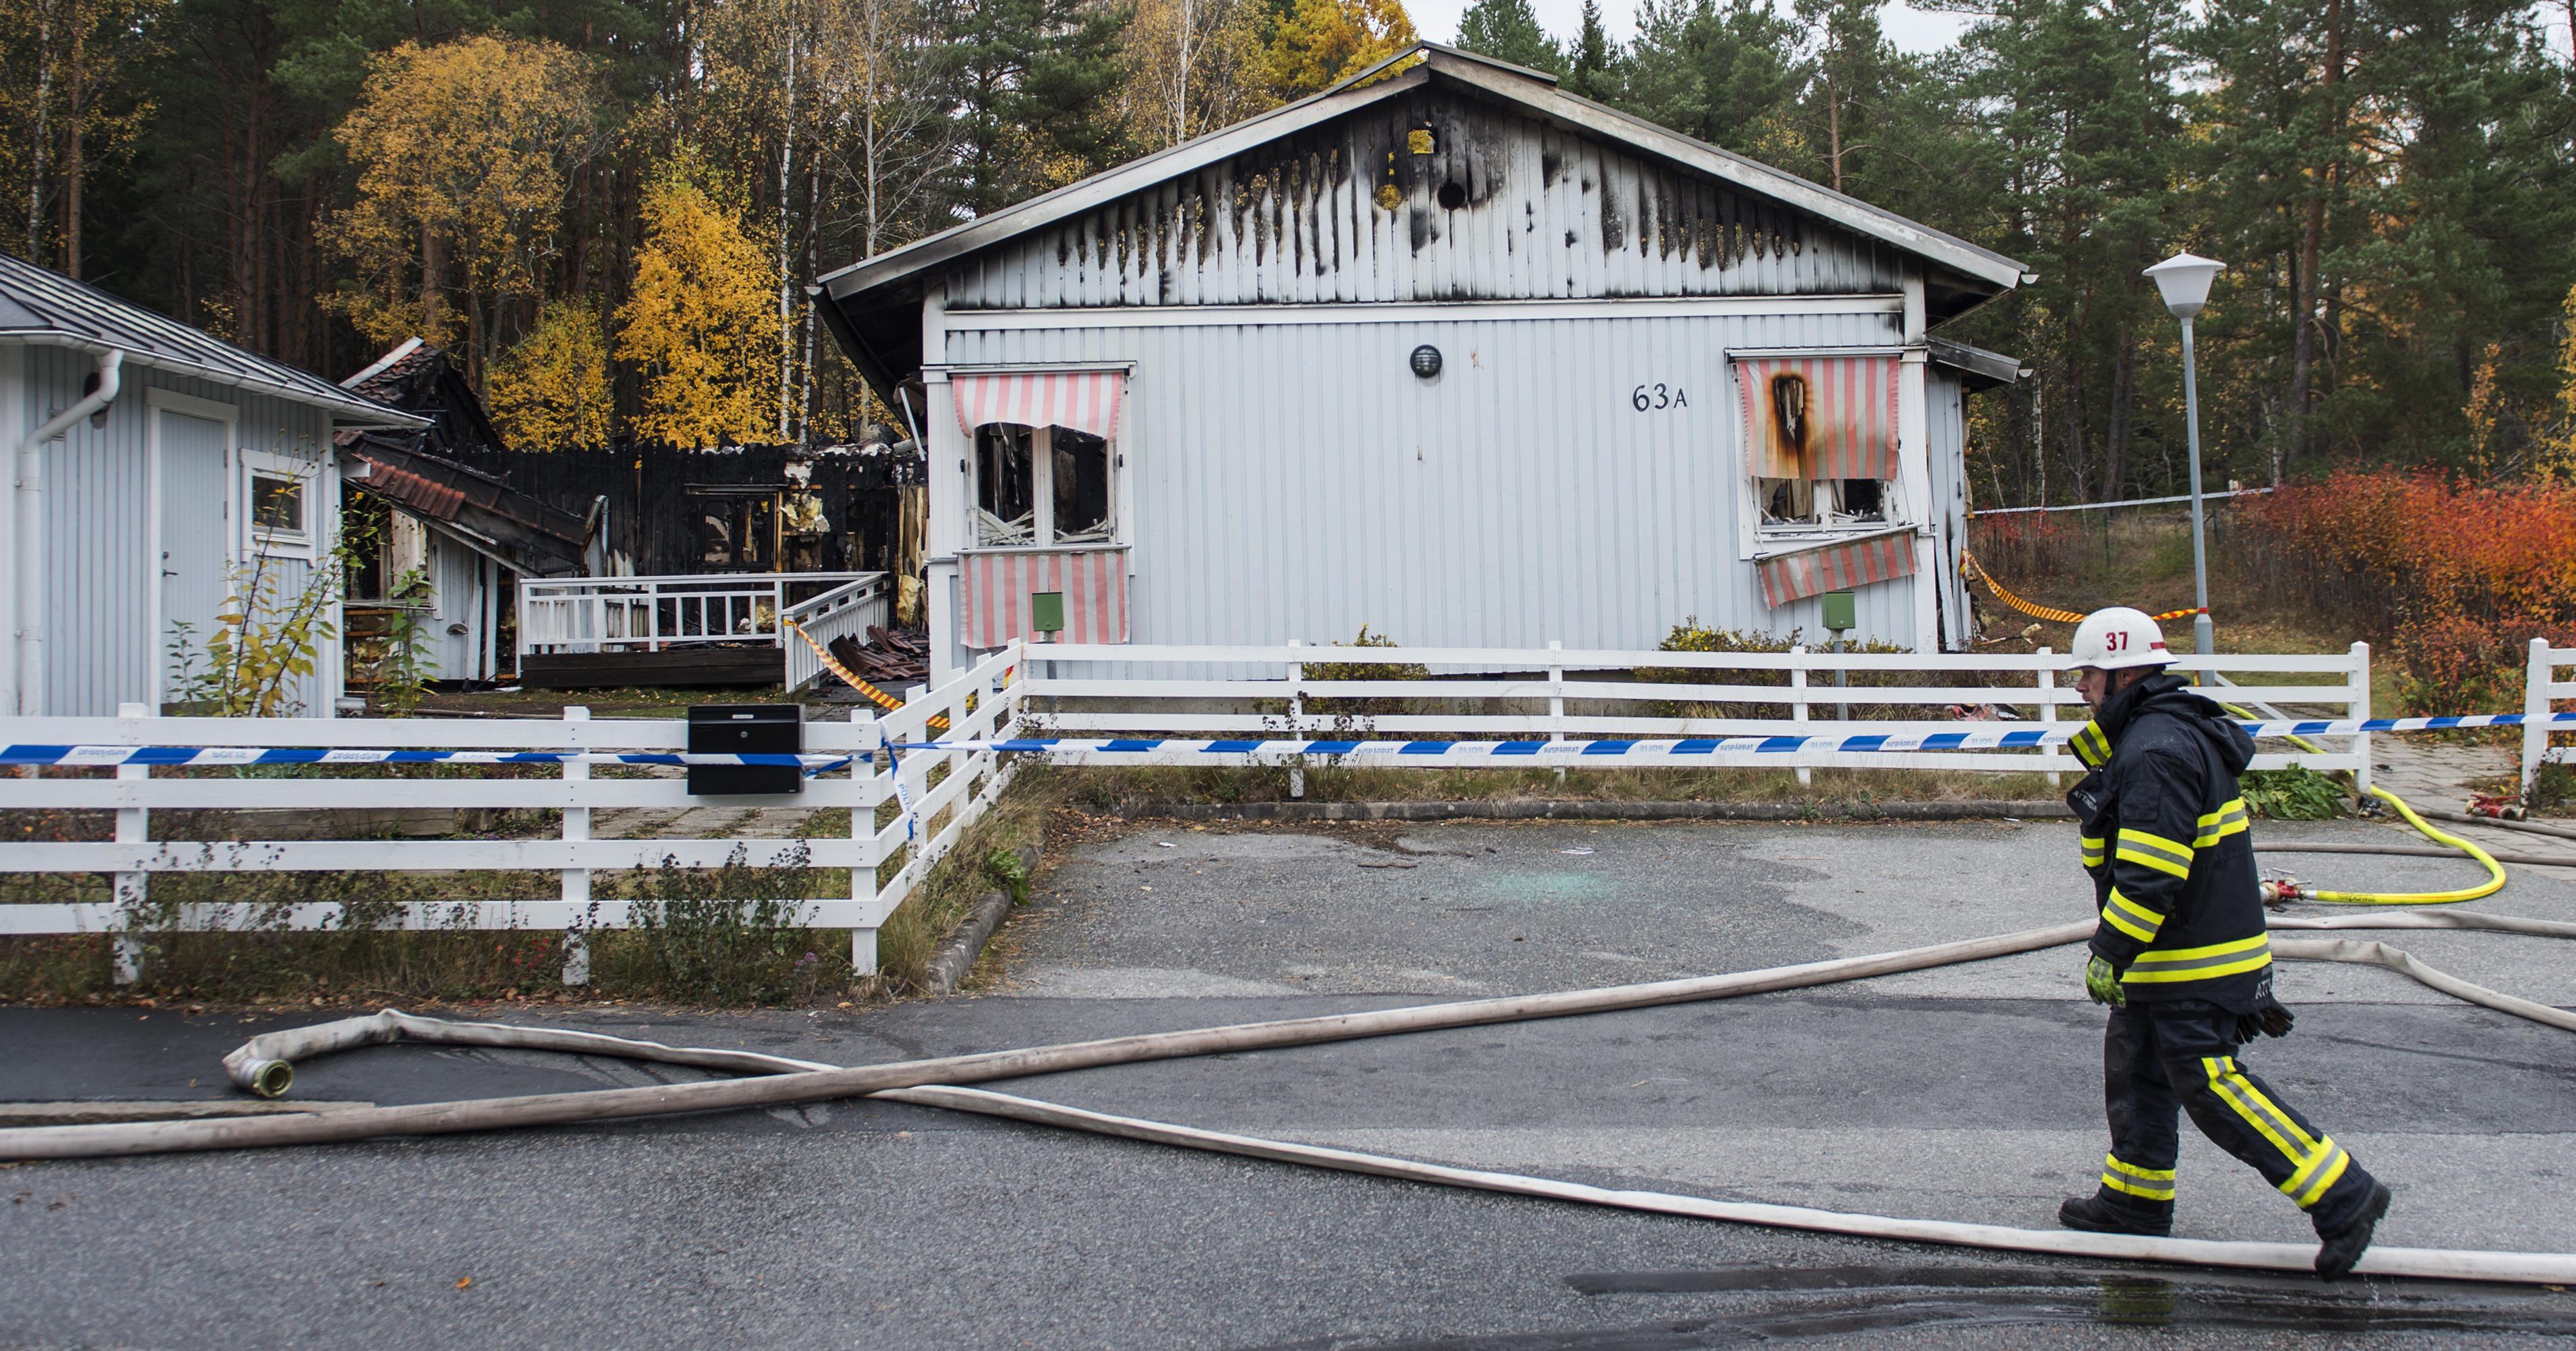 Sweden refugee center fires likely arson force evacuation of 300 asylum ...